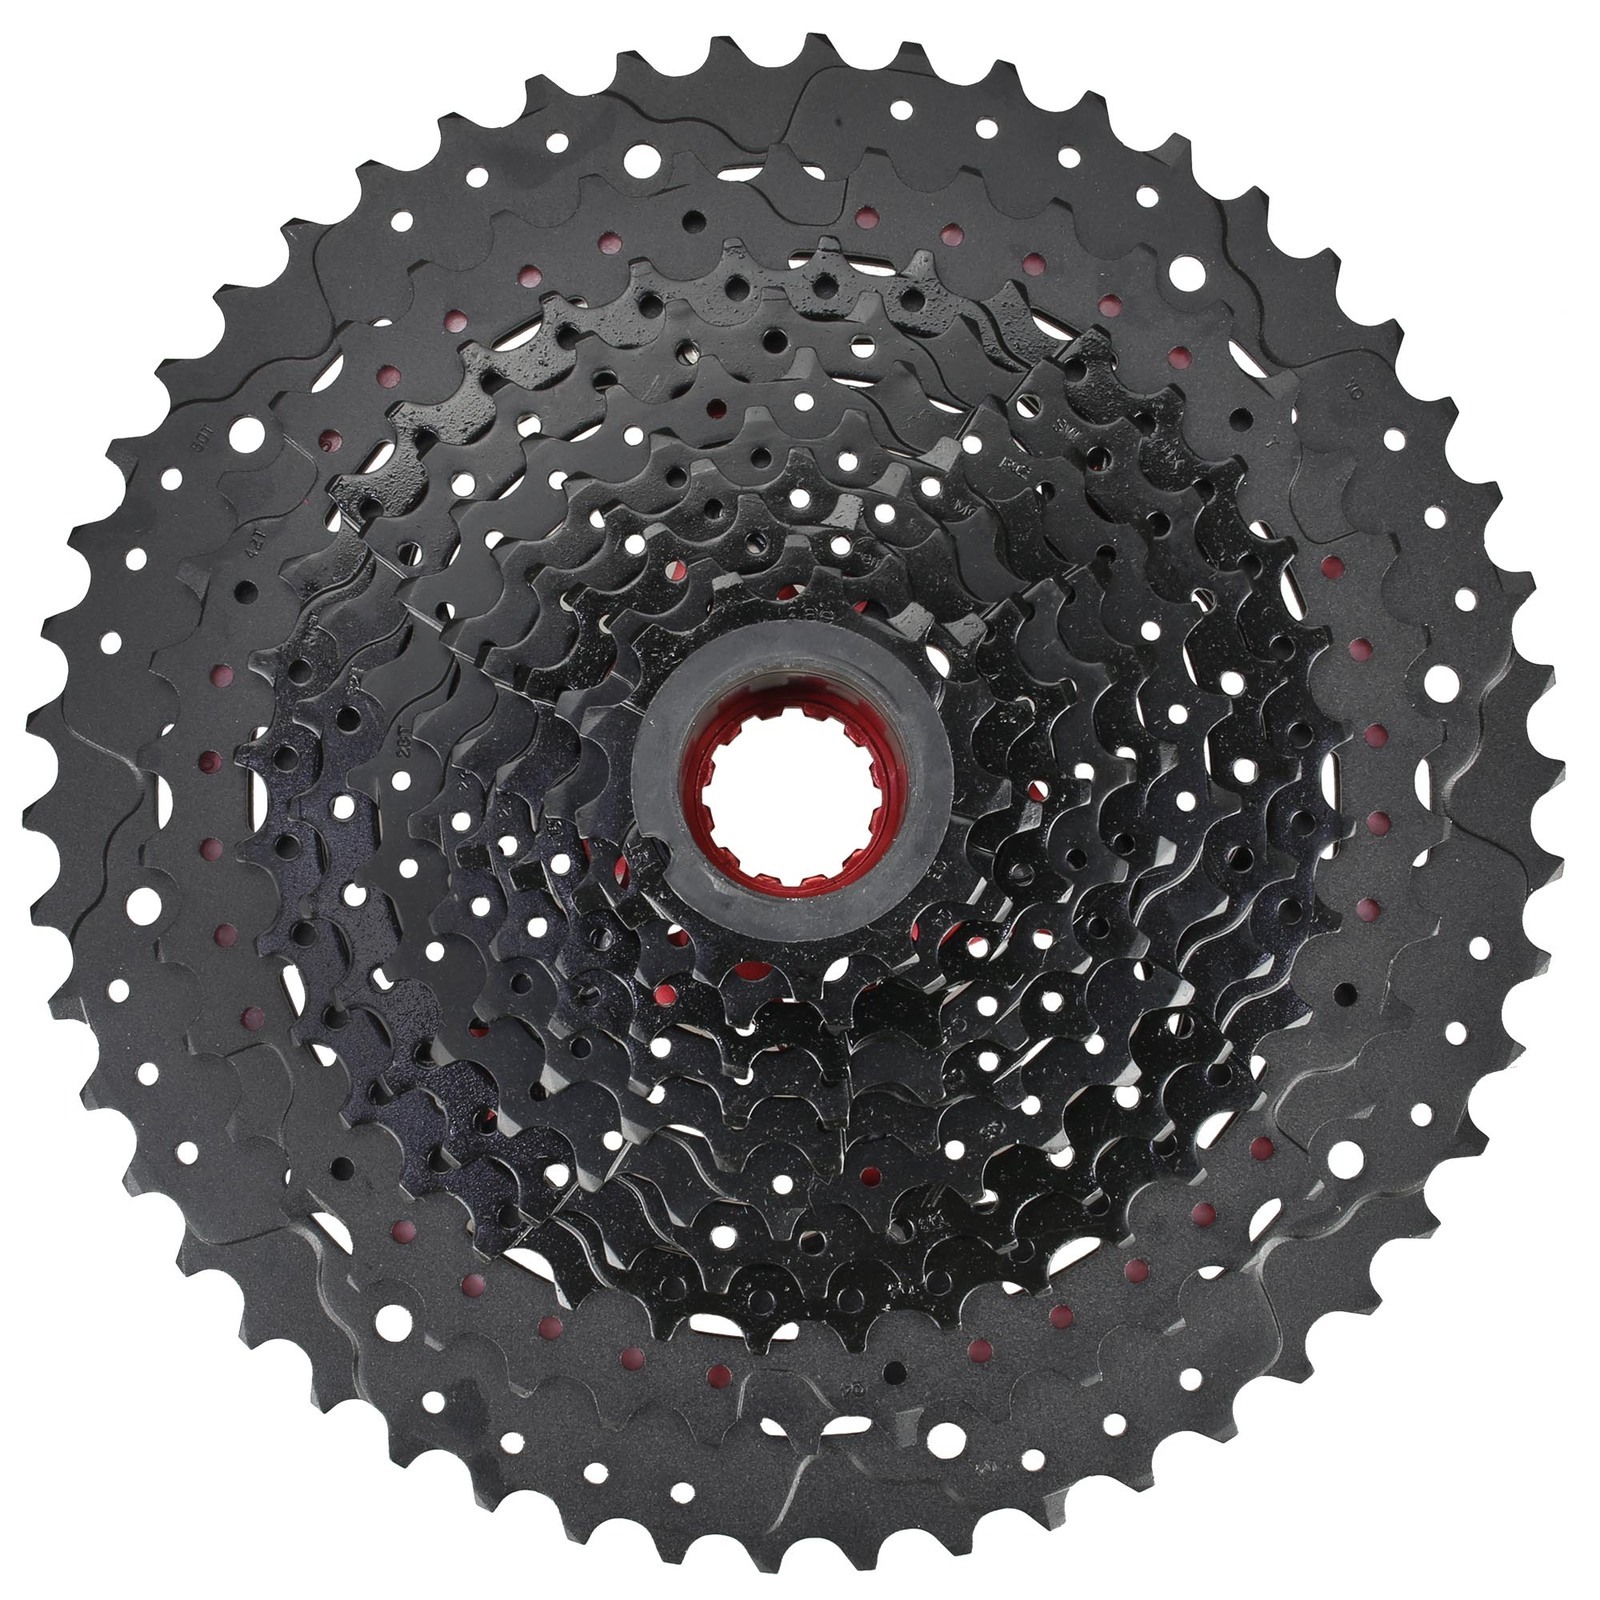 Sunrace MX80 Shimano 11 Speed Bicycle Cassette 11-50T Black